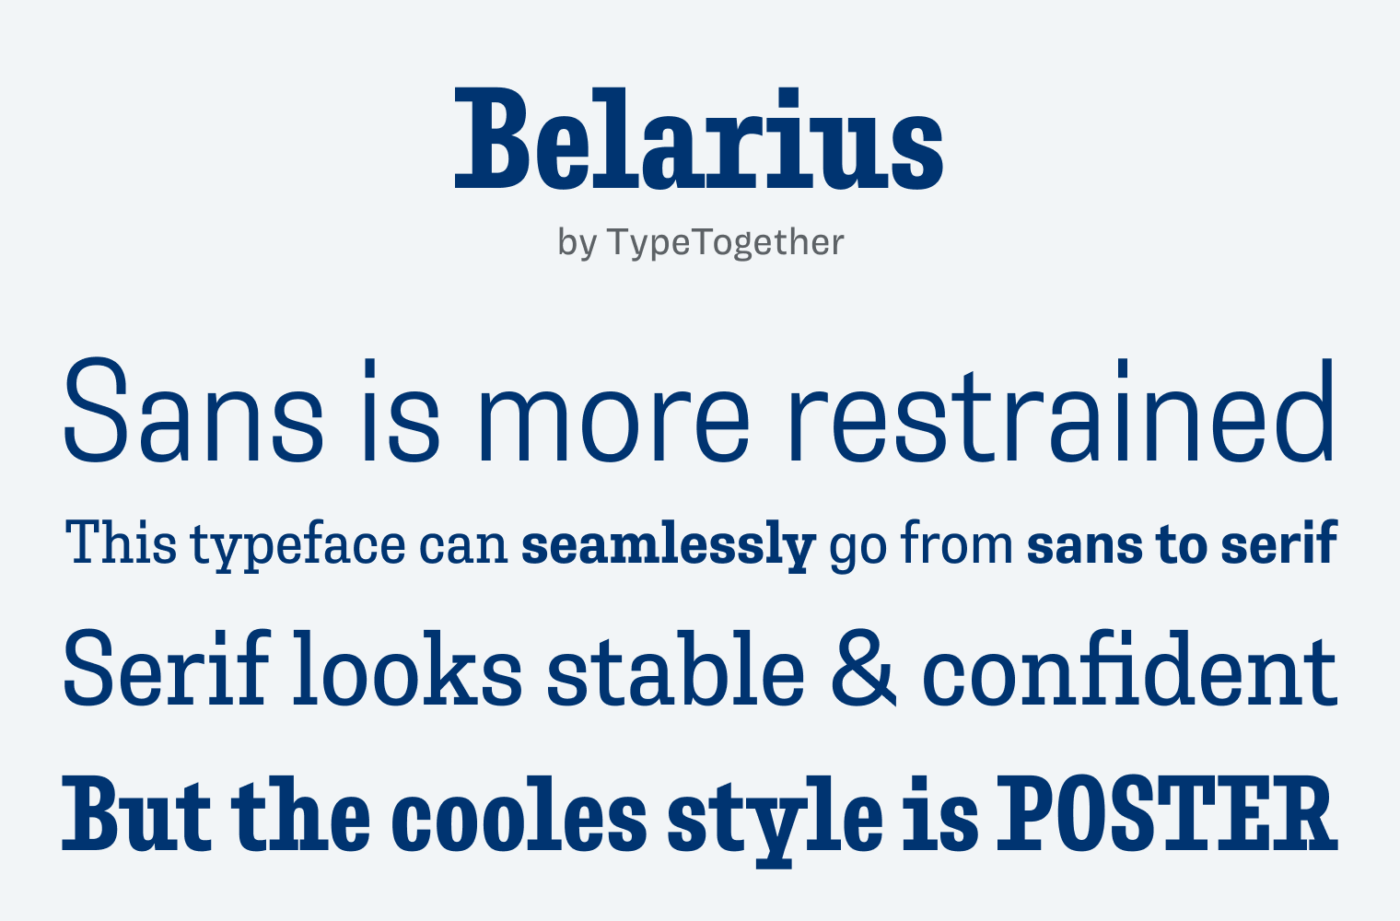 Belarius
by TypeTogether
Sans is more restrained
This typeface can seamlessly go from sans to serif Serif looks stable & confident
But the cooles style is POSTER